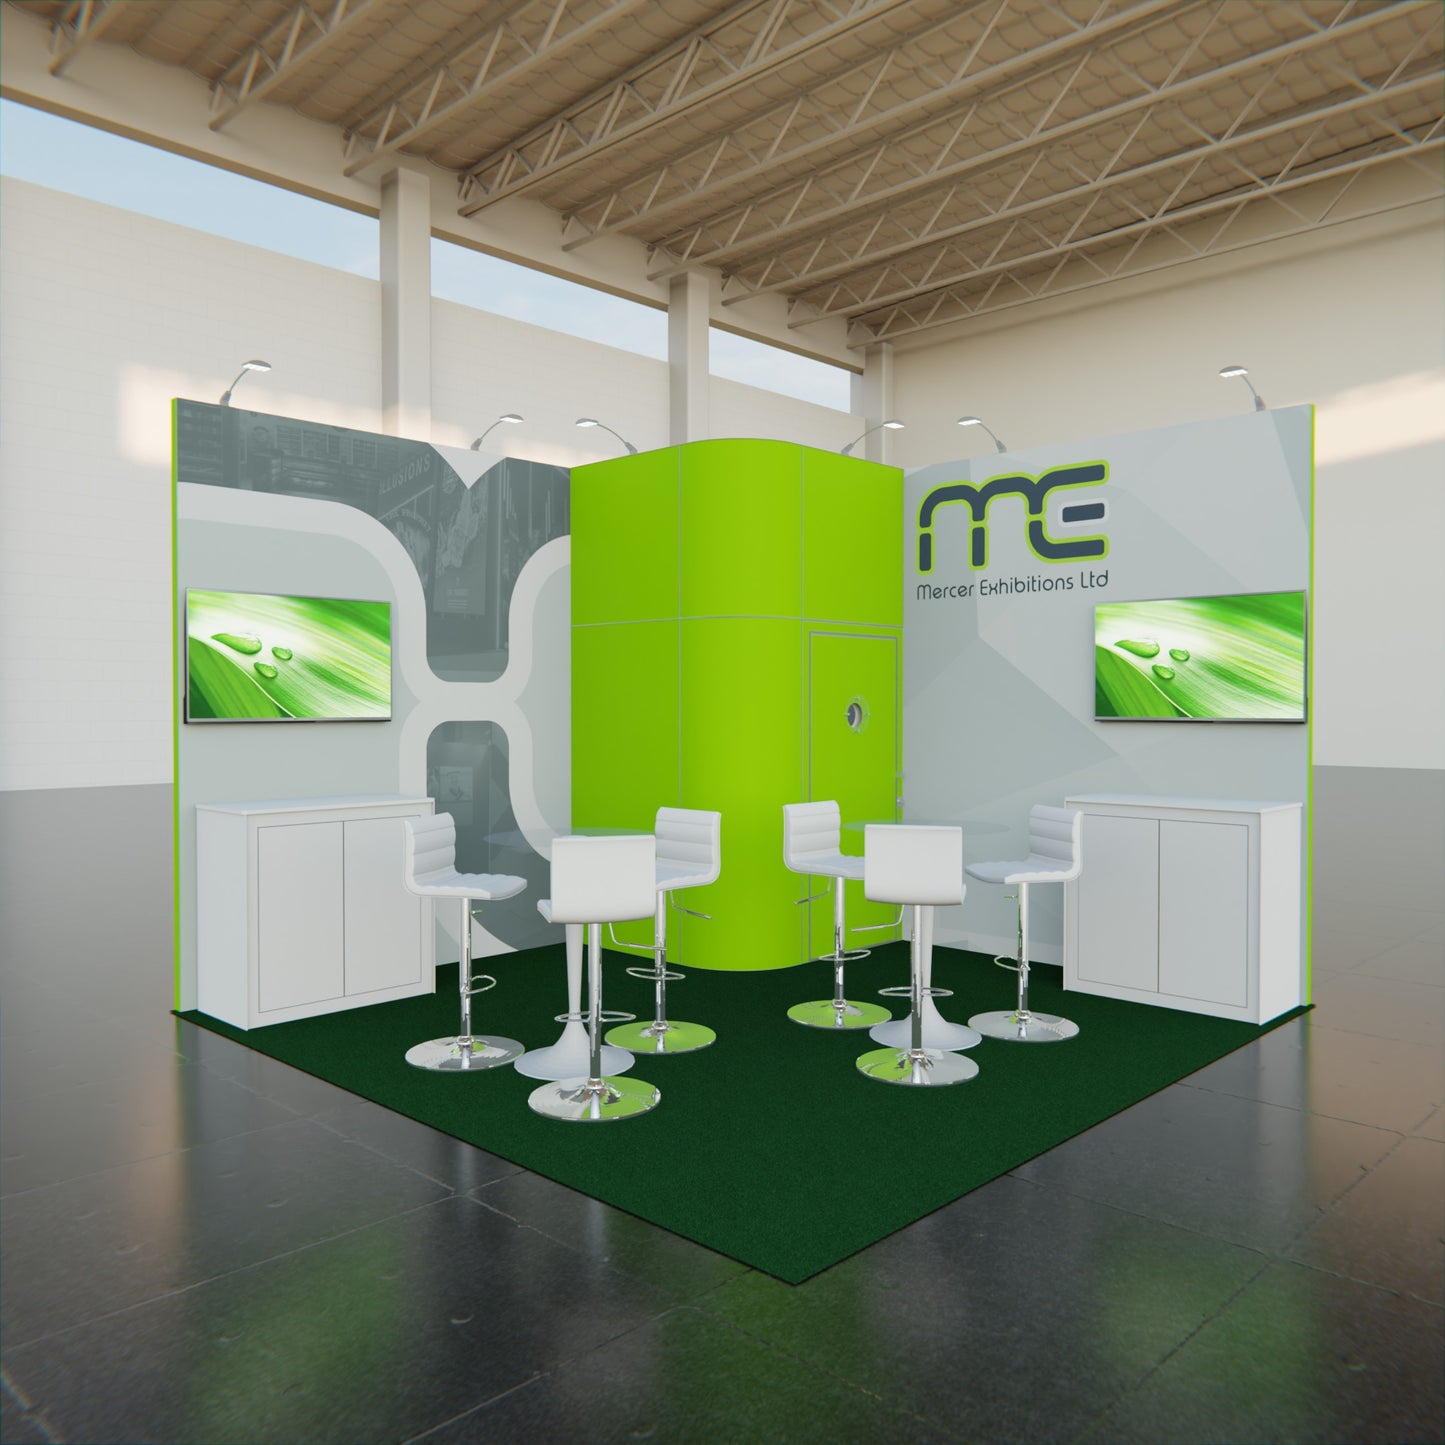 Five Meter x Five Meter "L" Shape Exhibition Stand, Two Open Sides